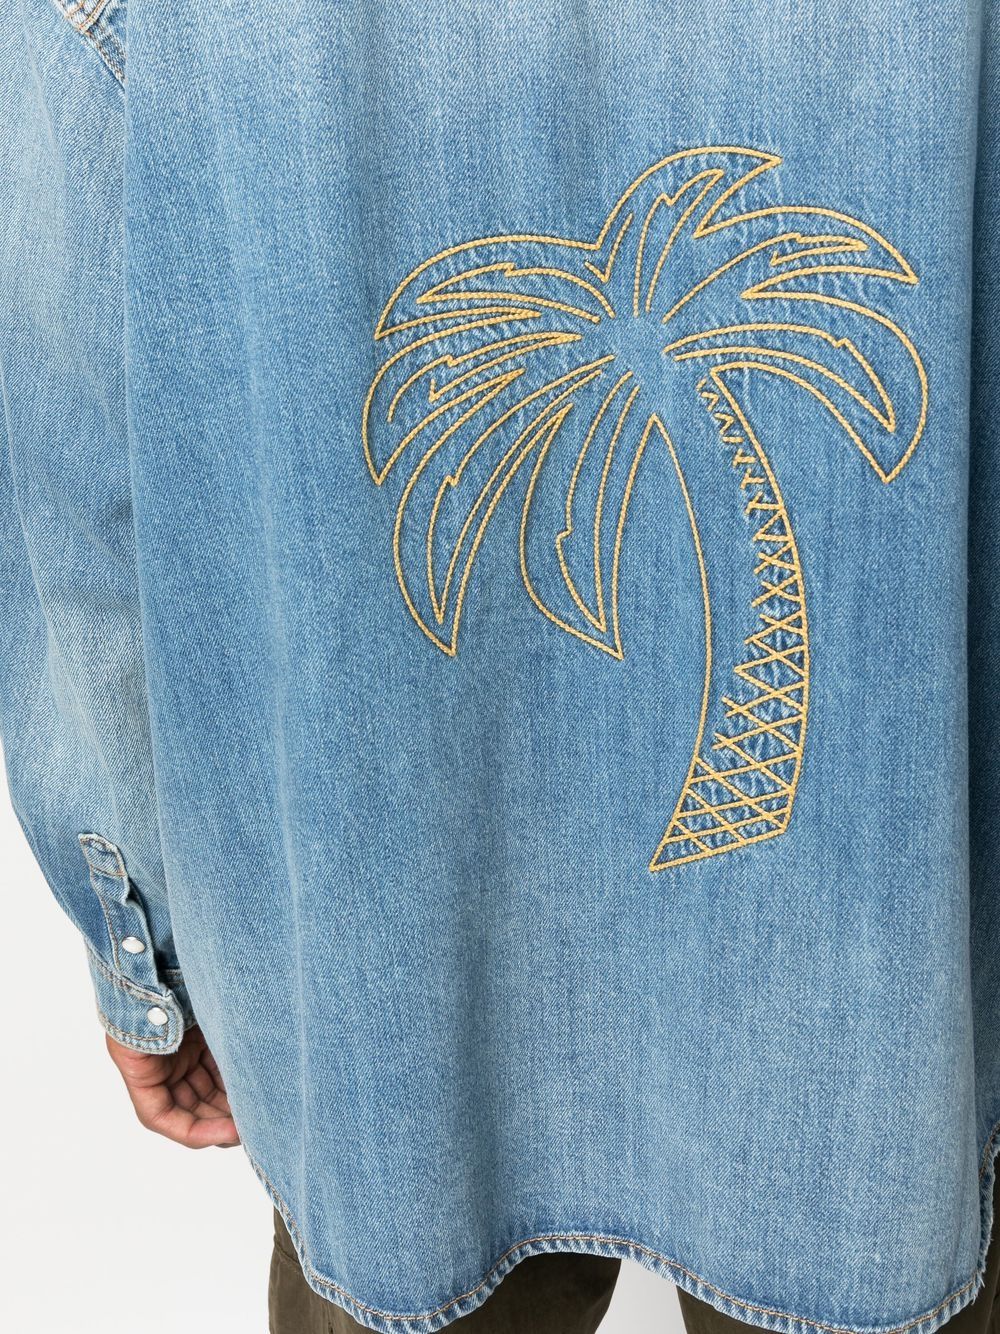 LUCKY BRAND Western Denim Shirt California Embroidered Palm Tree Top Blouse  Sz S